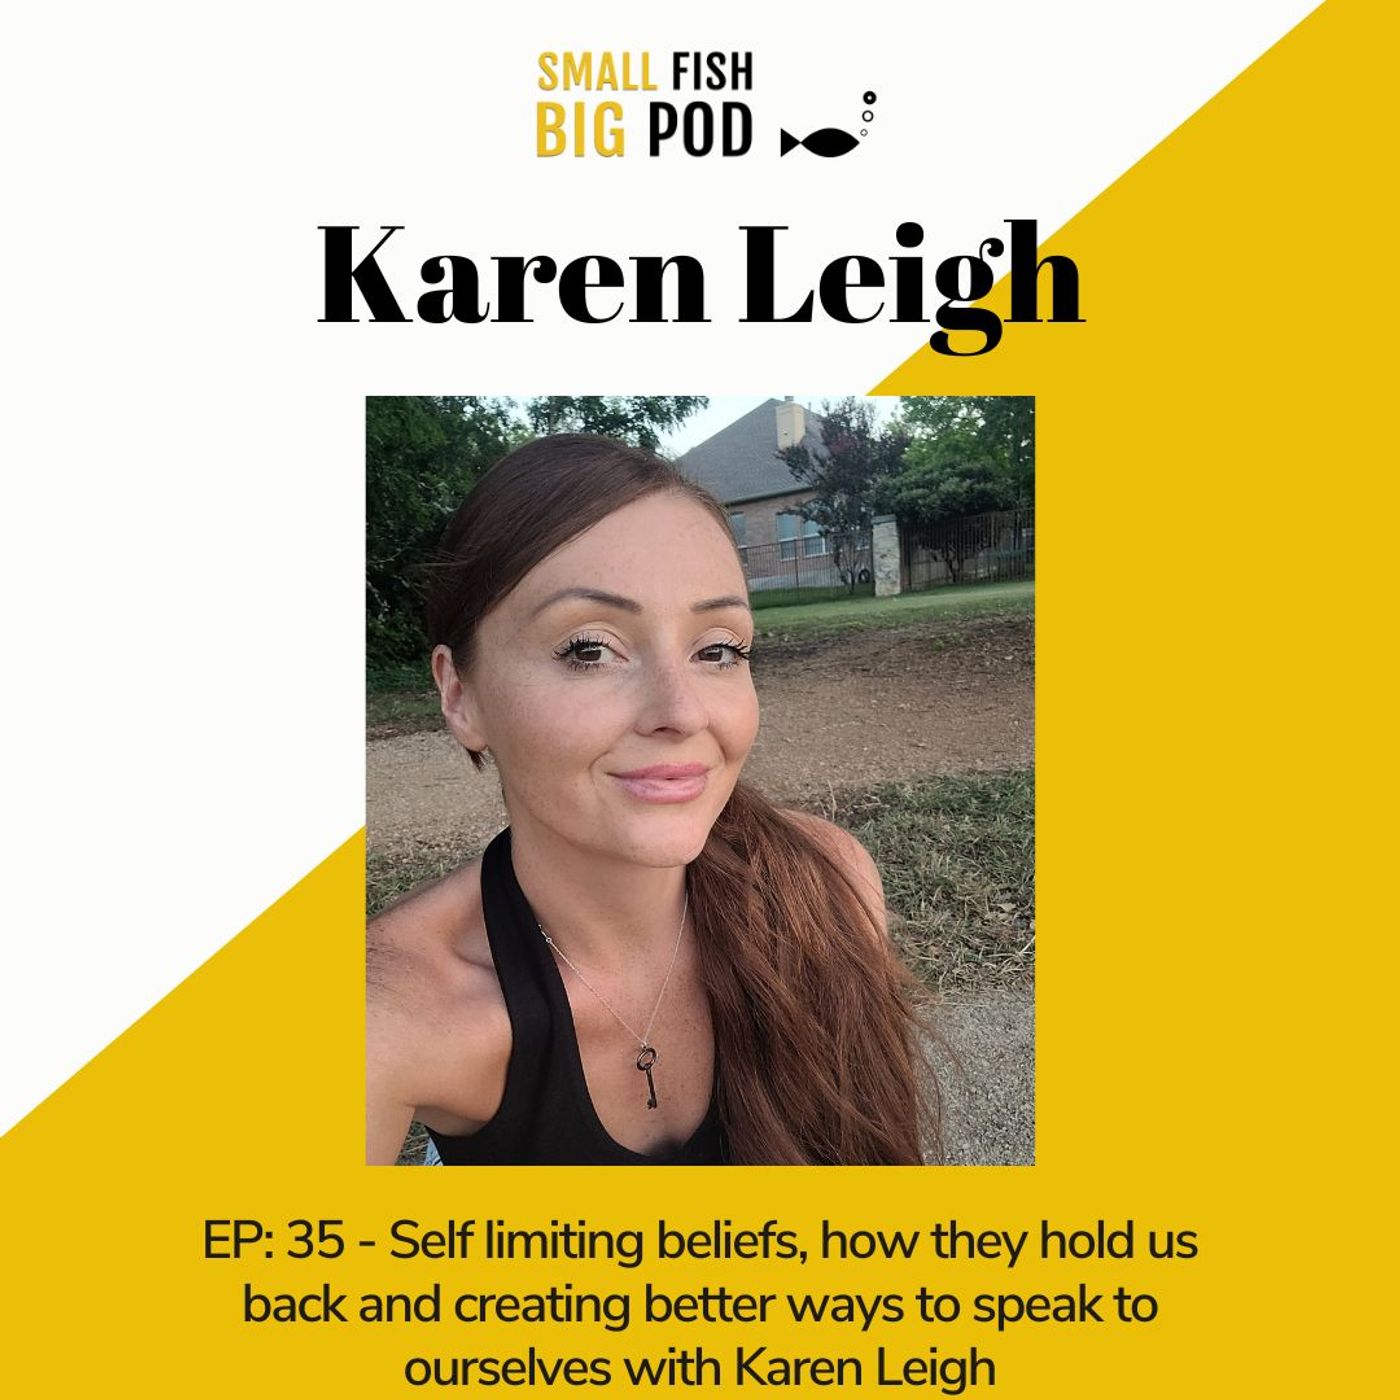 EP35- Self limiting beliefs, how they hold us back and creating better ways to speak to ourselves with Karen Leigh